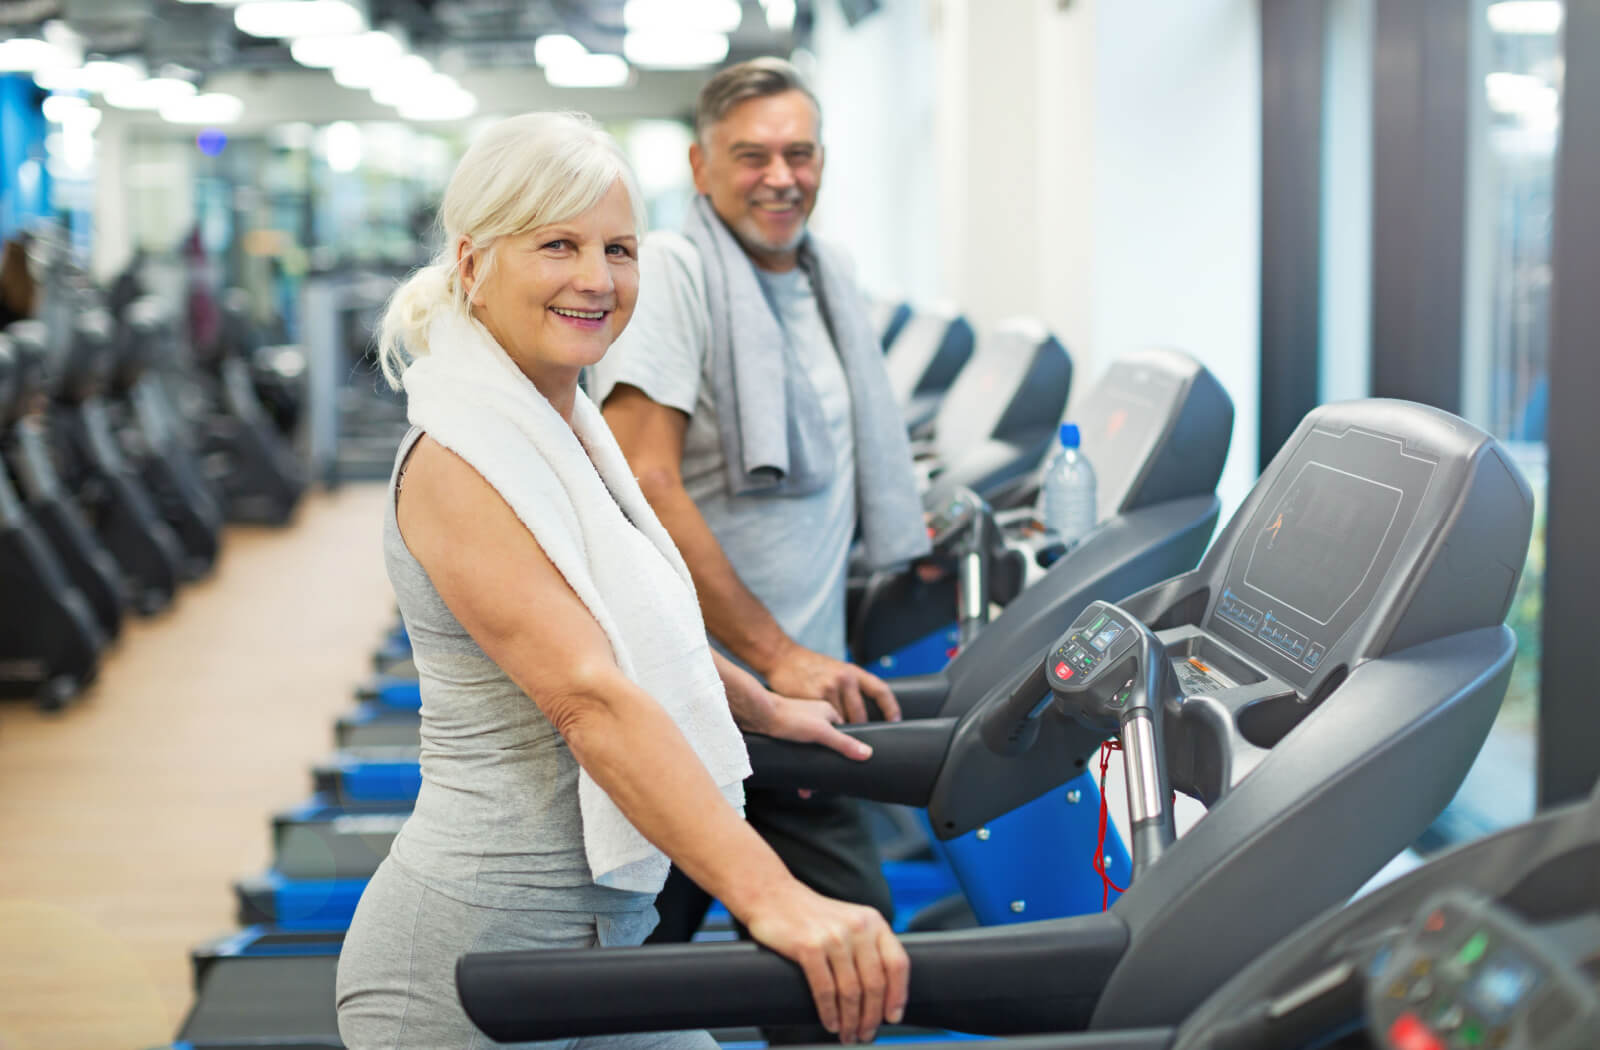 An older adult couple both using a treadmill as part of their regular exercise routine.